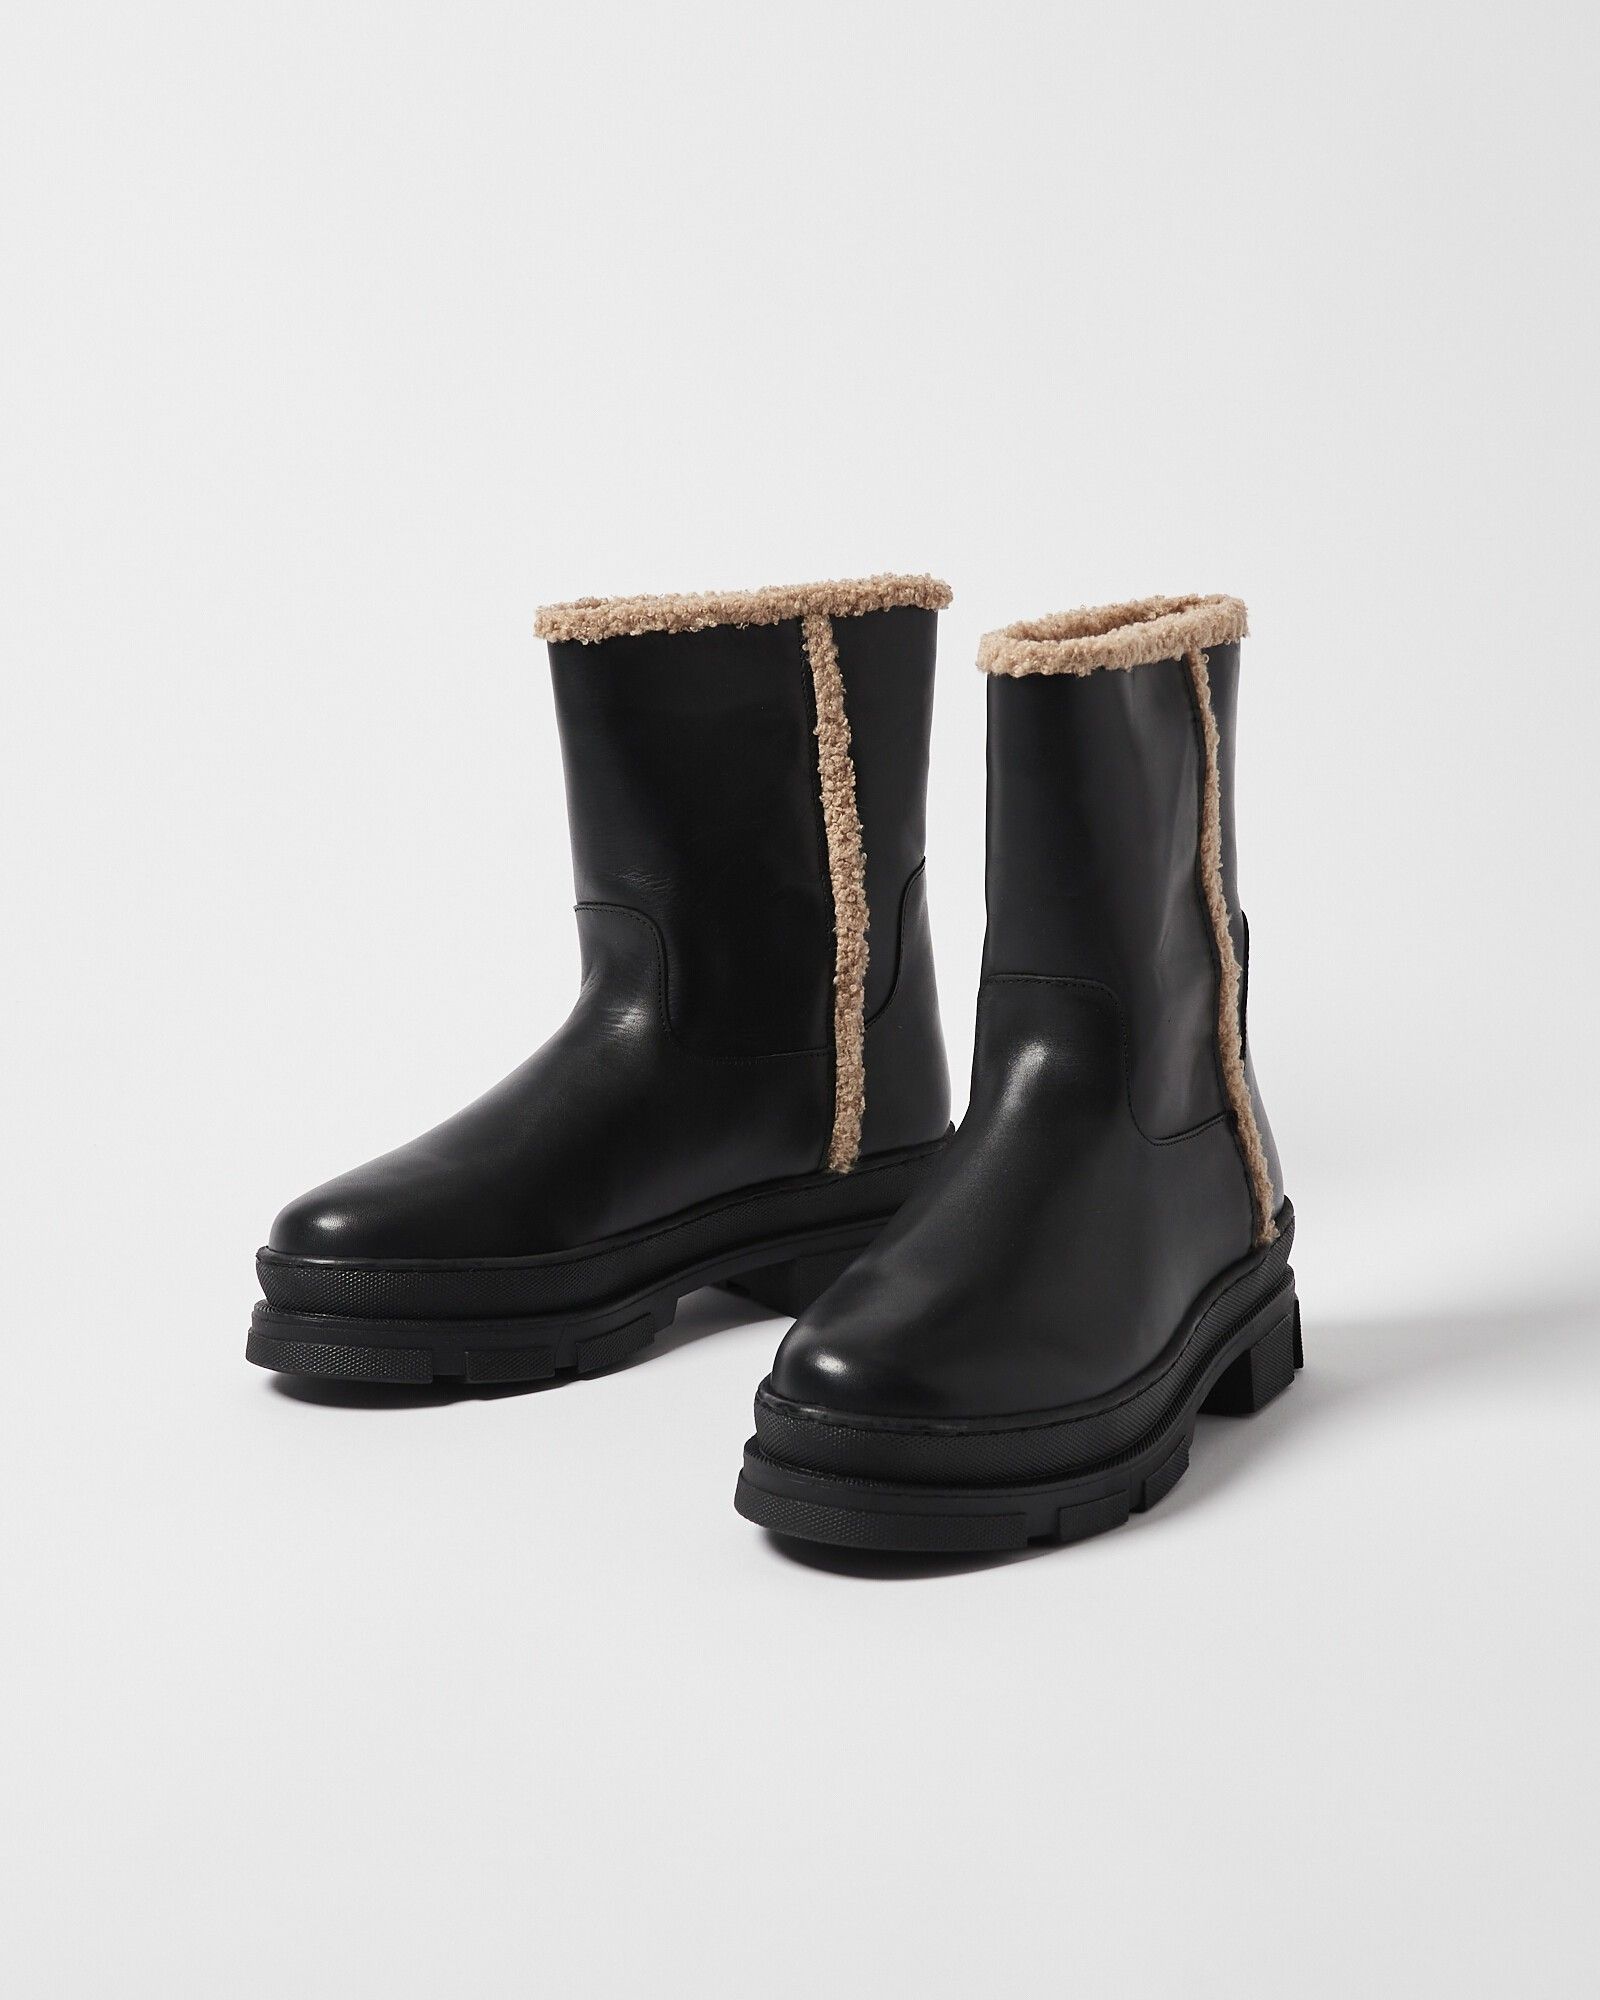 Shoe The Bear Olga Pull On Black Leather Boots